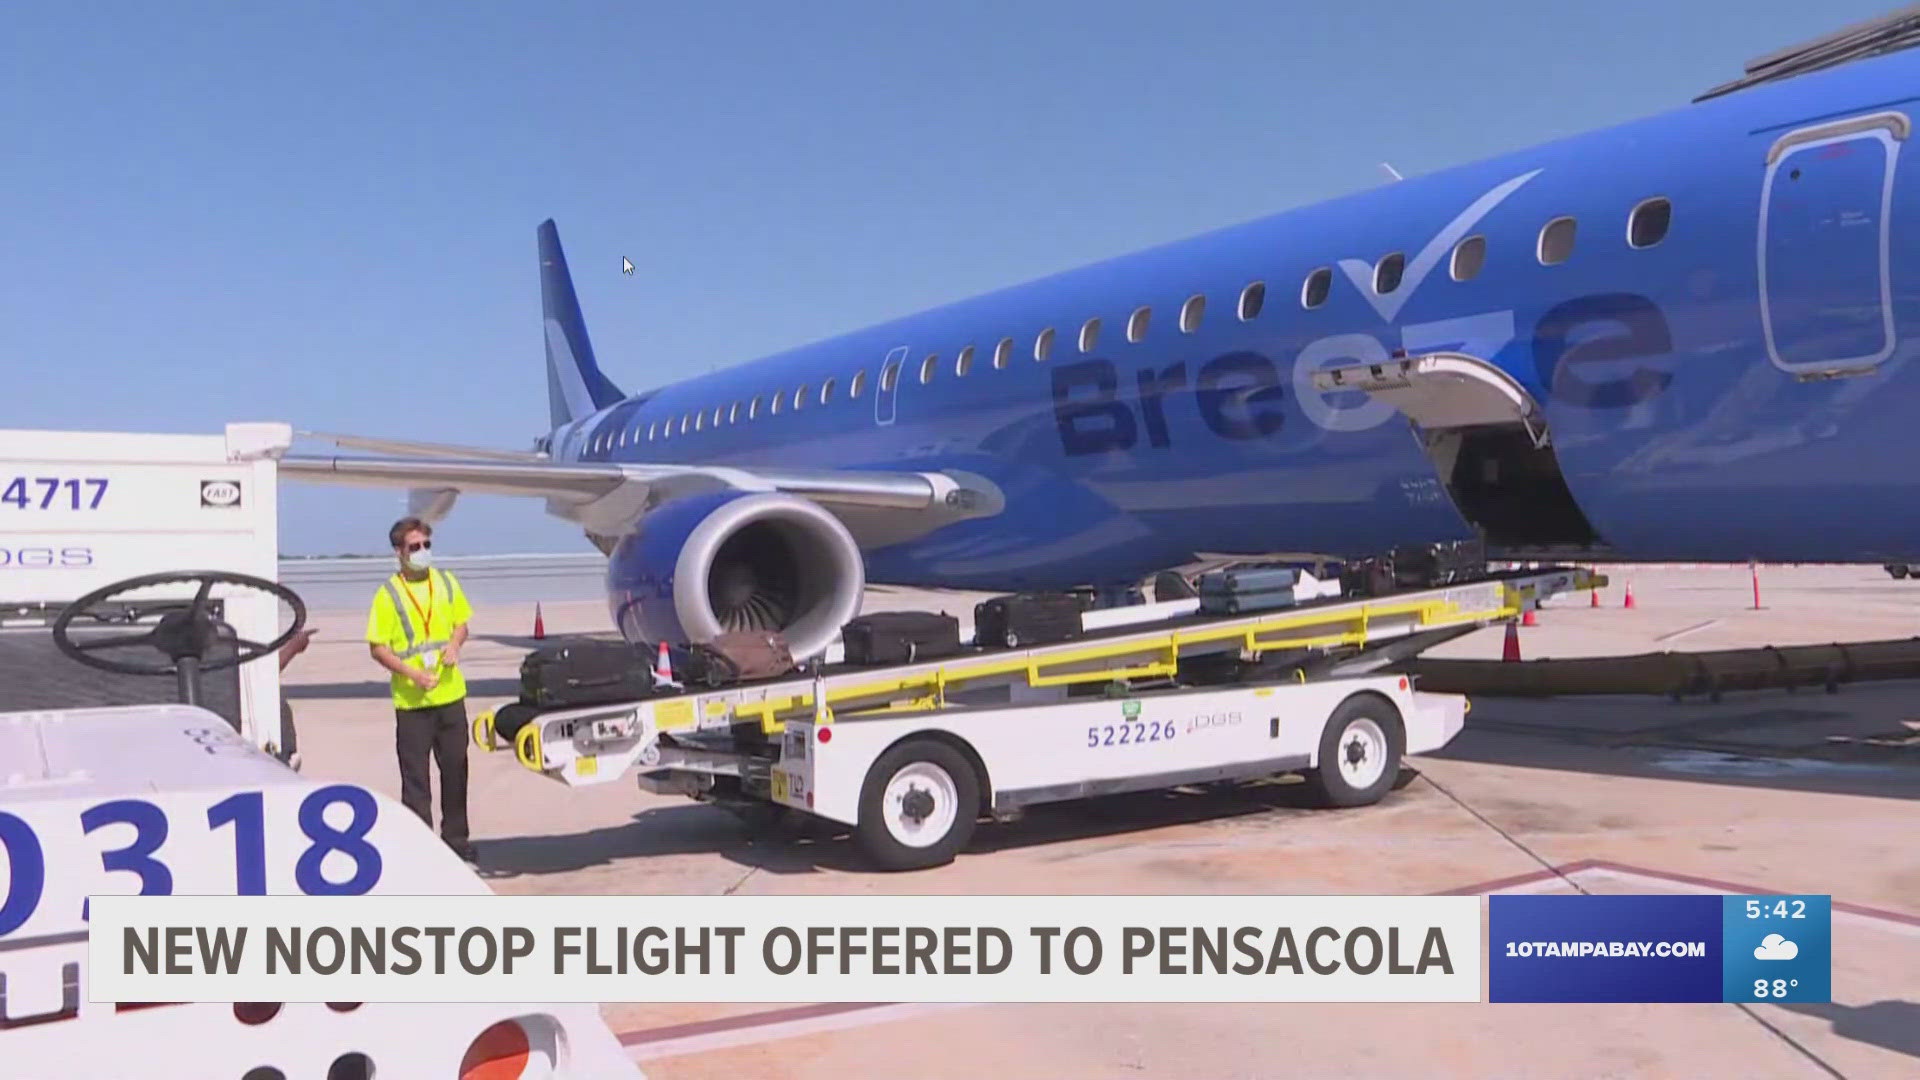 The low-cost carrier offers point-to-point service from more than 50 U.S. destinations.